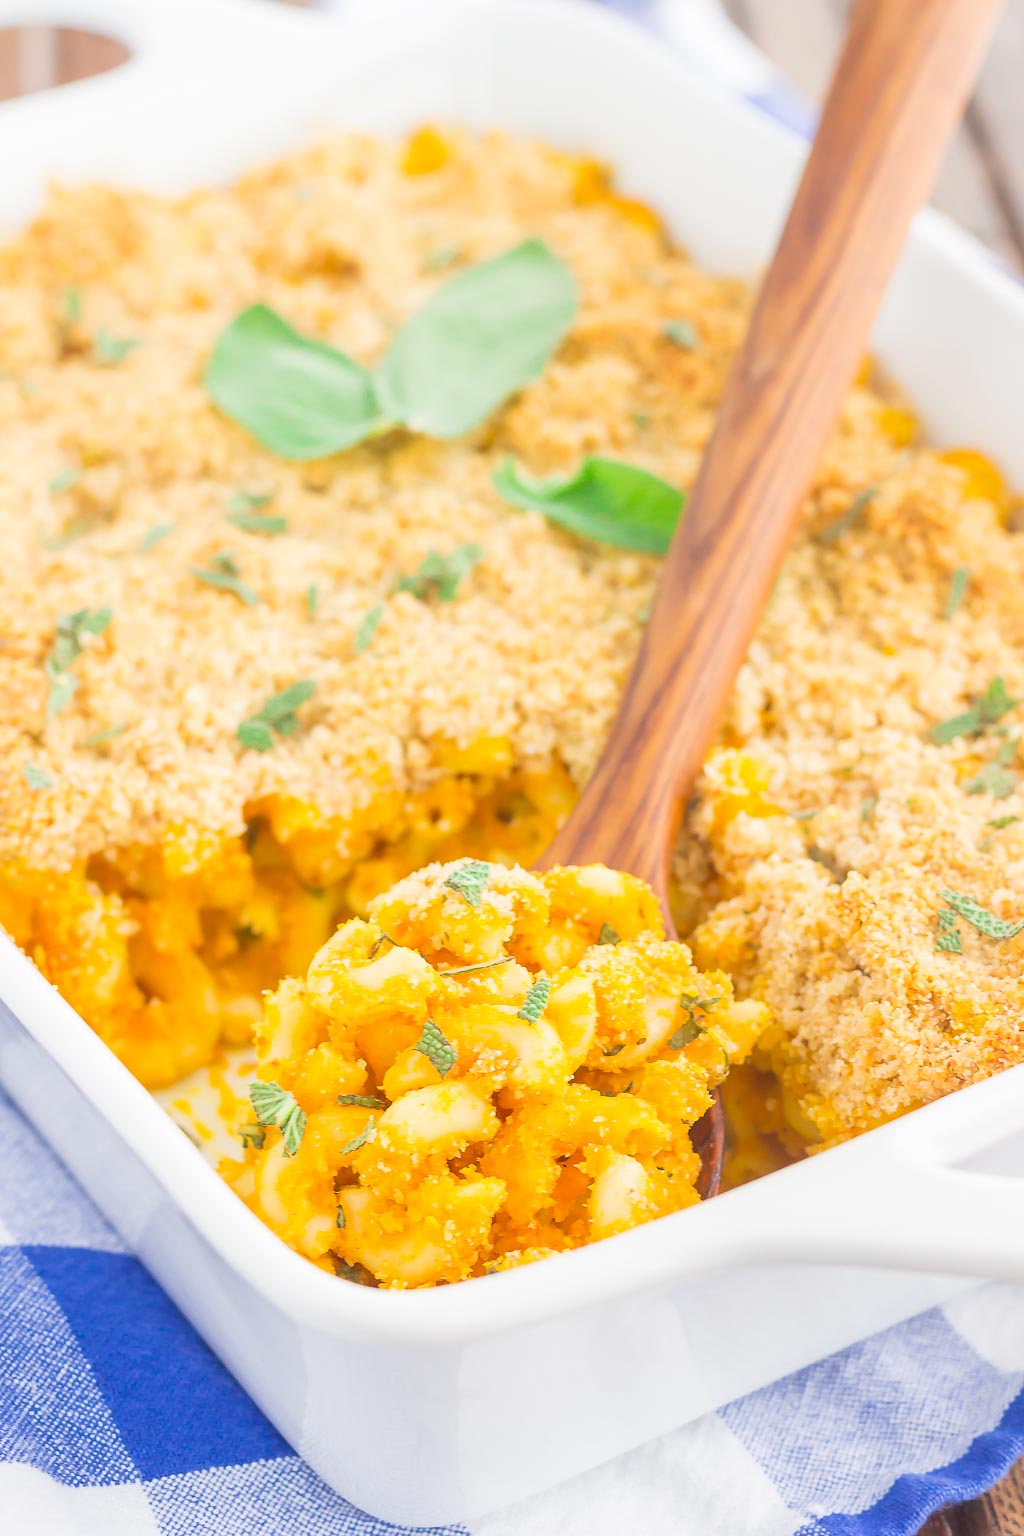 This Pumpkin Macaroni and Cheese is the perfect fall comfort dish to savor the season. Creamy pumpkin, two types of cheese, and a savory topping come together to create the ultimate side dish. Easy to make and bursting with flavor, you'll love the unique spin on a classic recipe!